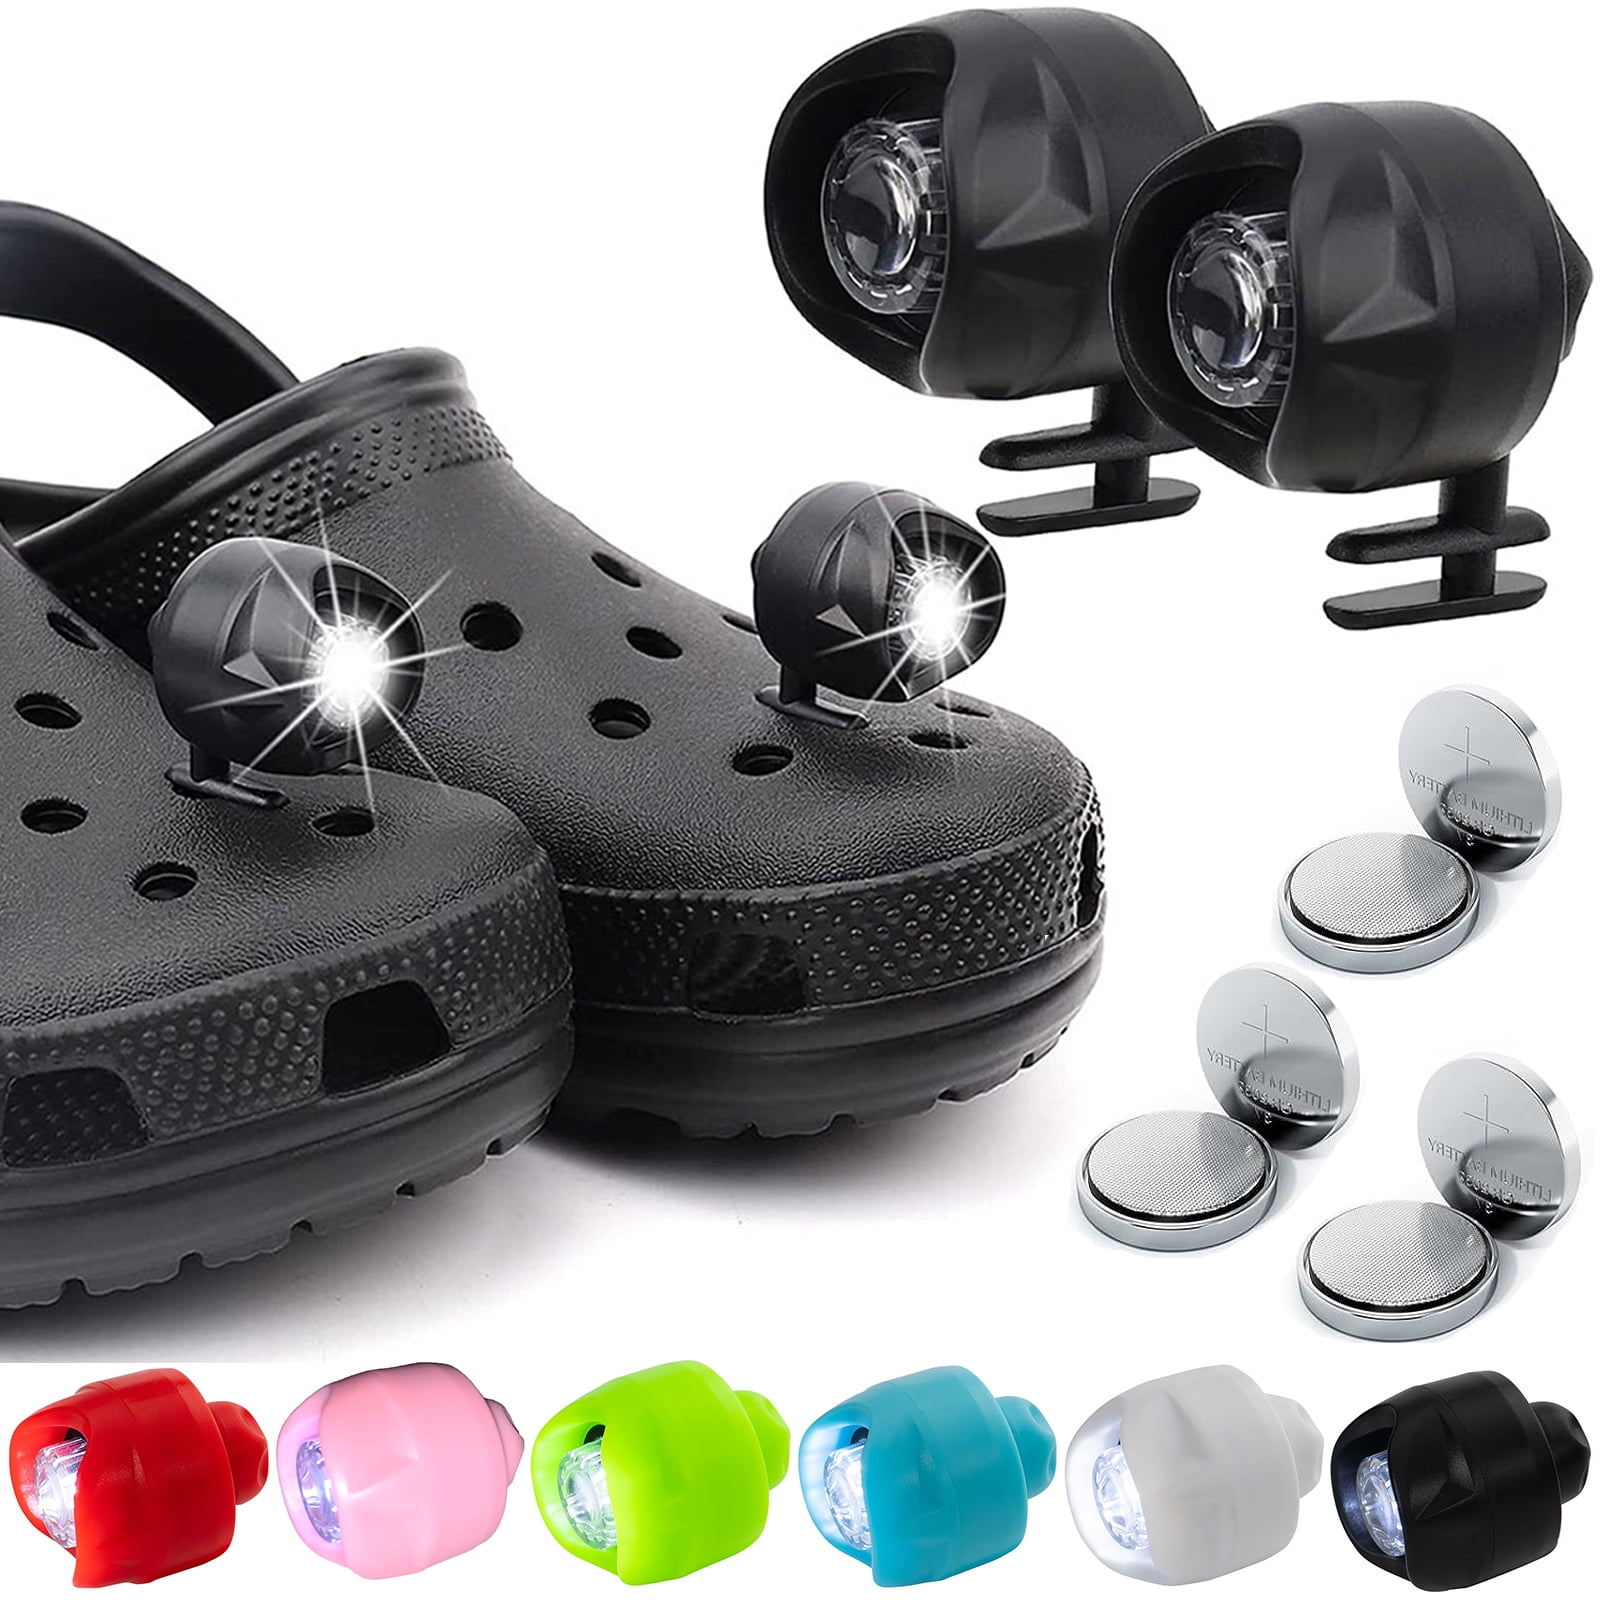 HYEASTR Croc Lights for Shoes - Headlights for Clogs 2pcs, Flashlight  Attachment for Crocs, Waterproof LED Light Charms for Adults Kids Gifts,  Dog Walking, Hiking & Camping Gear - Black 